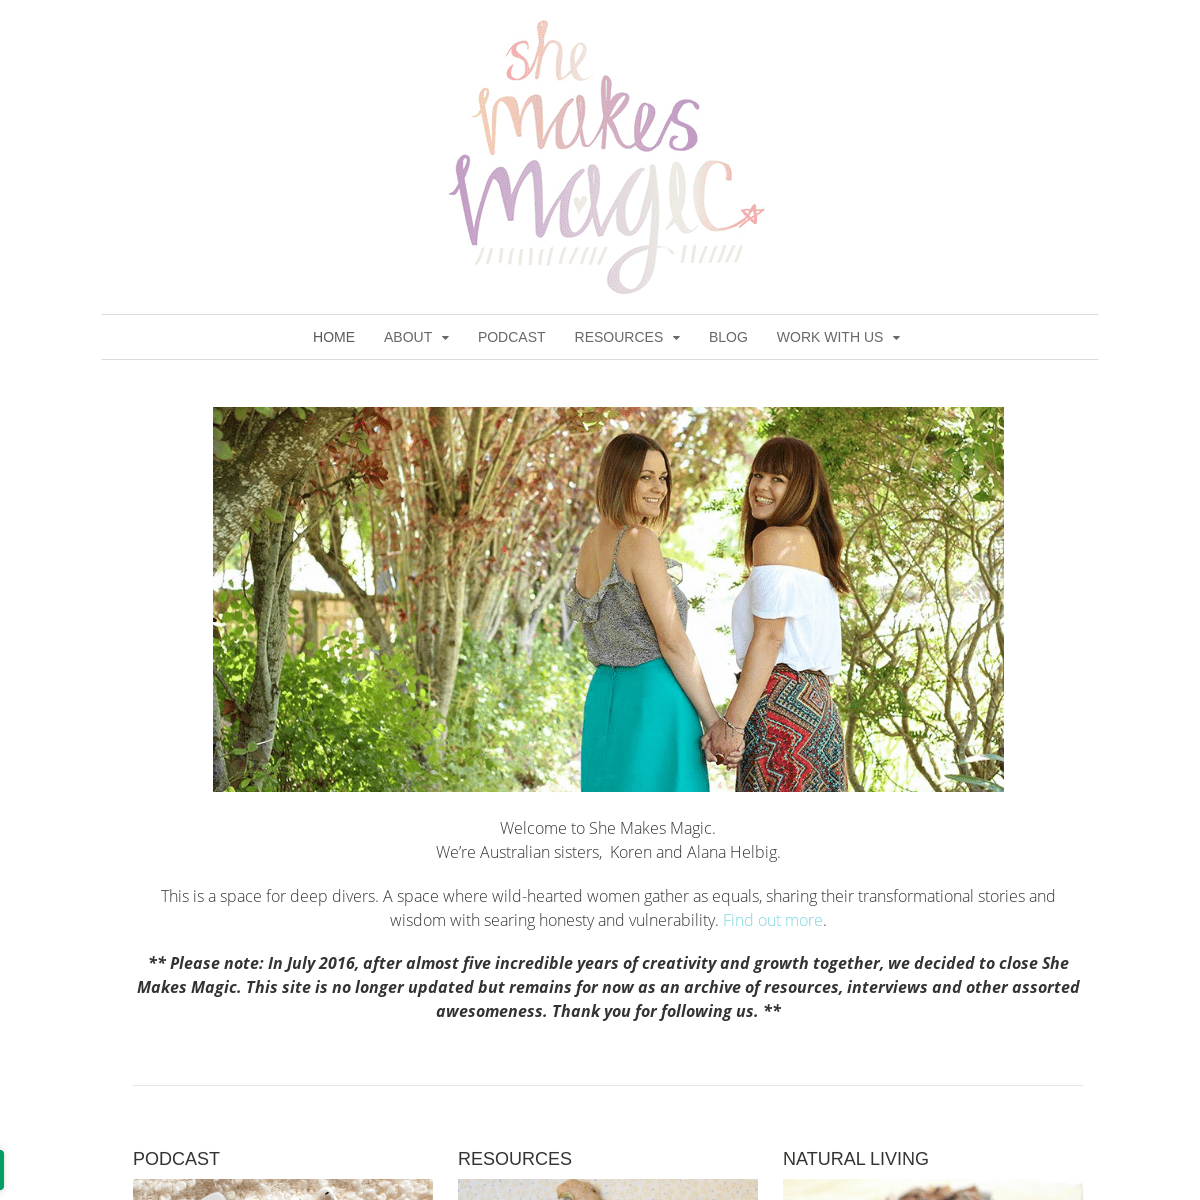 A complete backup of shemakesmagic.com